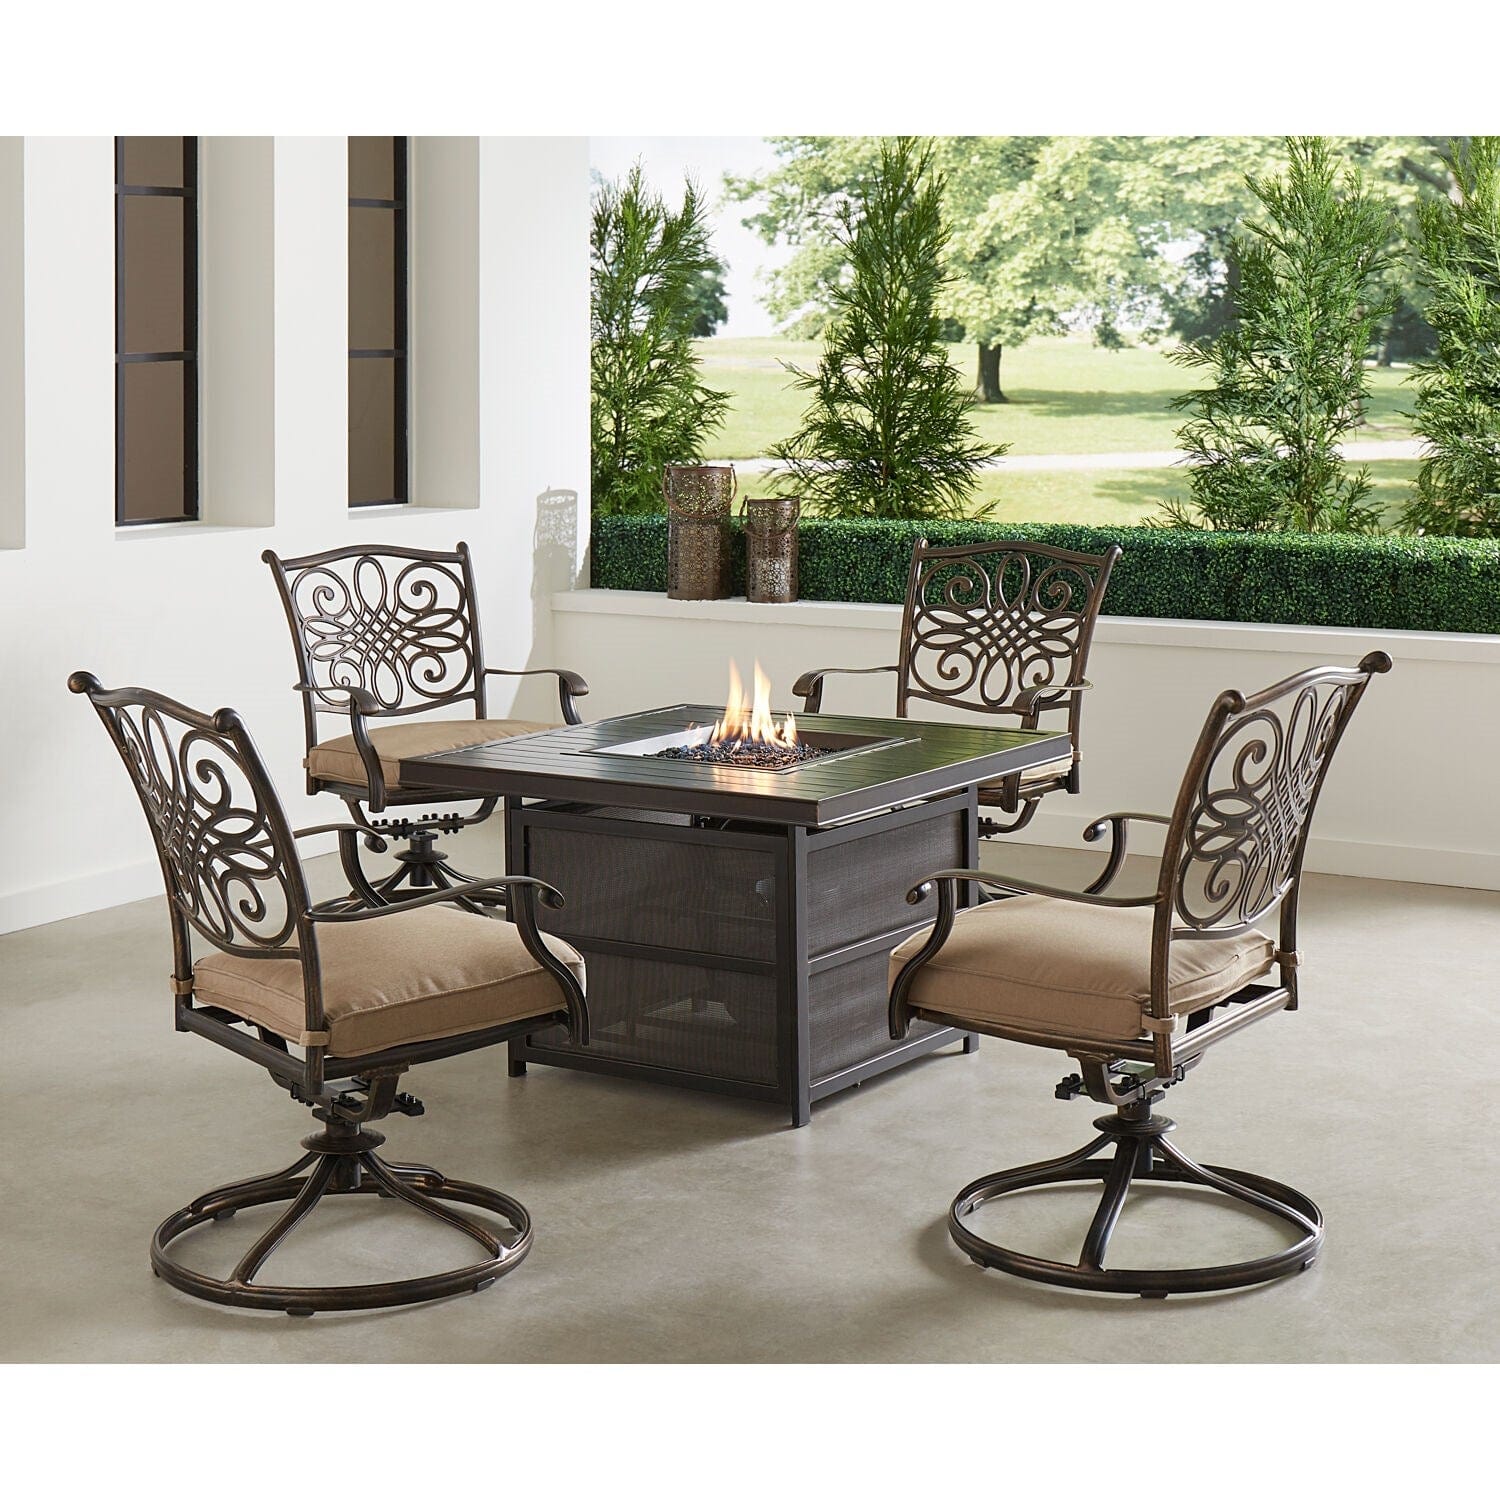 Hanover Fire Pit Chat Set Hanover Traditions 5-Piece Aluminum Frames Fire Pit Chat Set with Four Swivel Rockers in Tan and 38-in. 30,000 BTU Slat-Top Gas Fire Pit Table | Tan/Bronze | TRAD5PCSLSW4FP-TAN